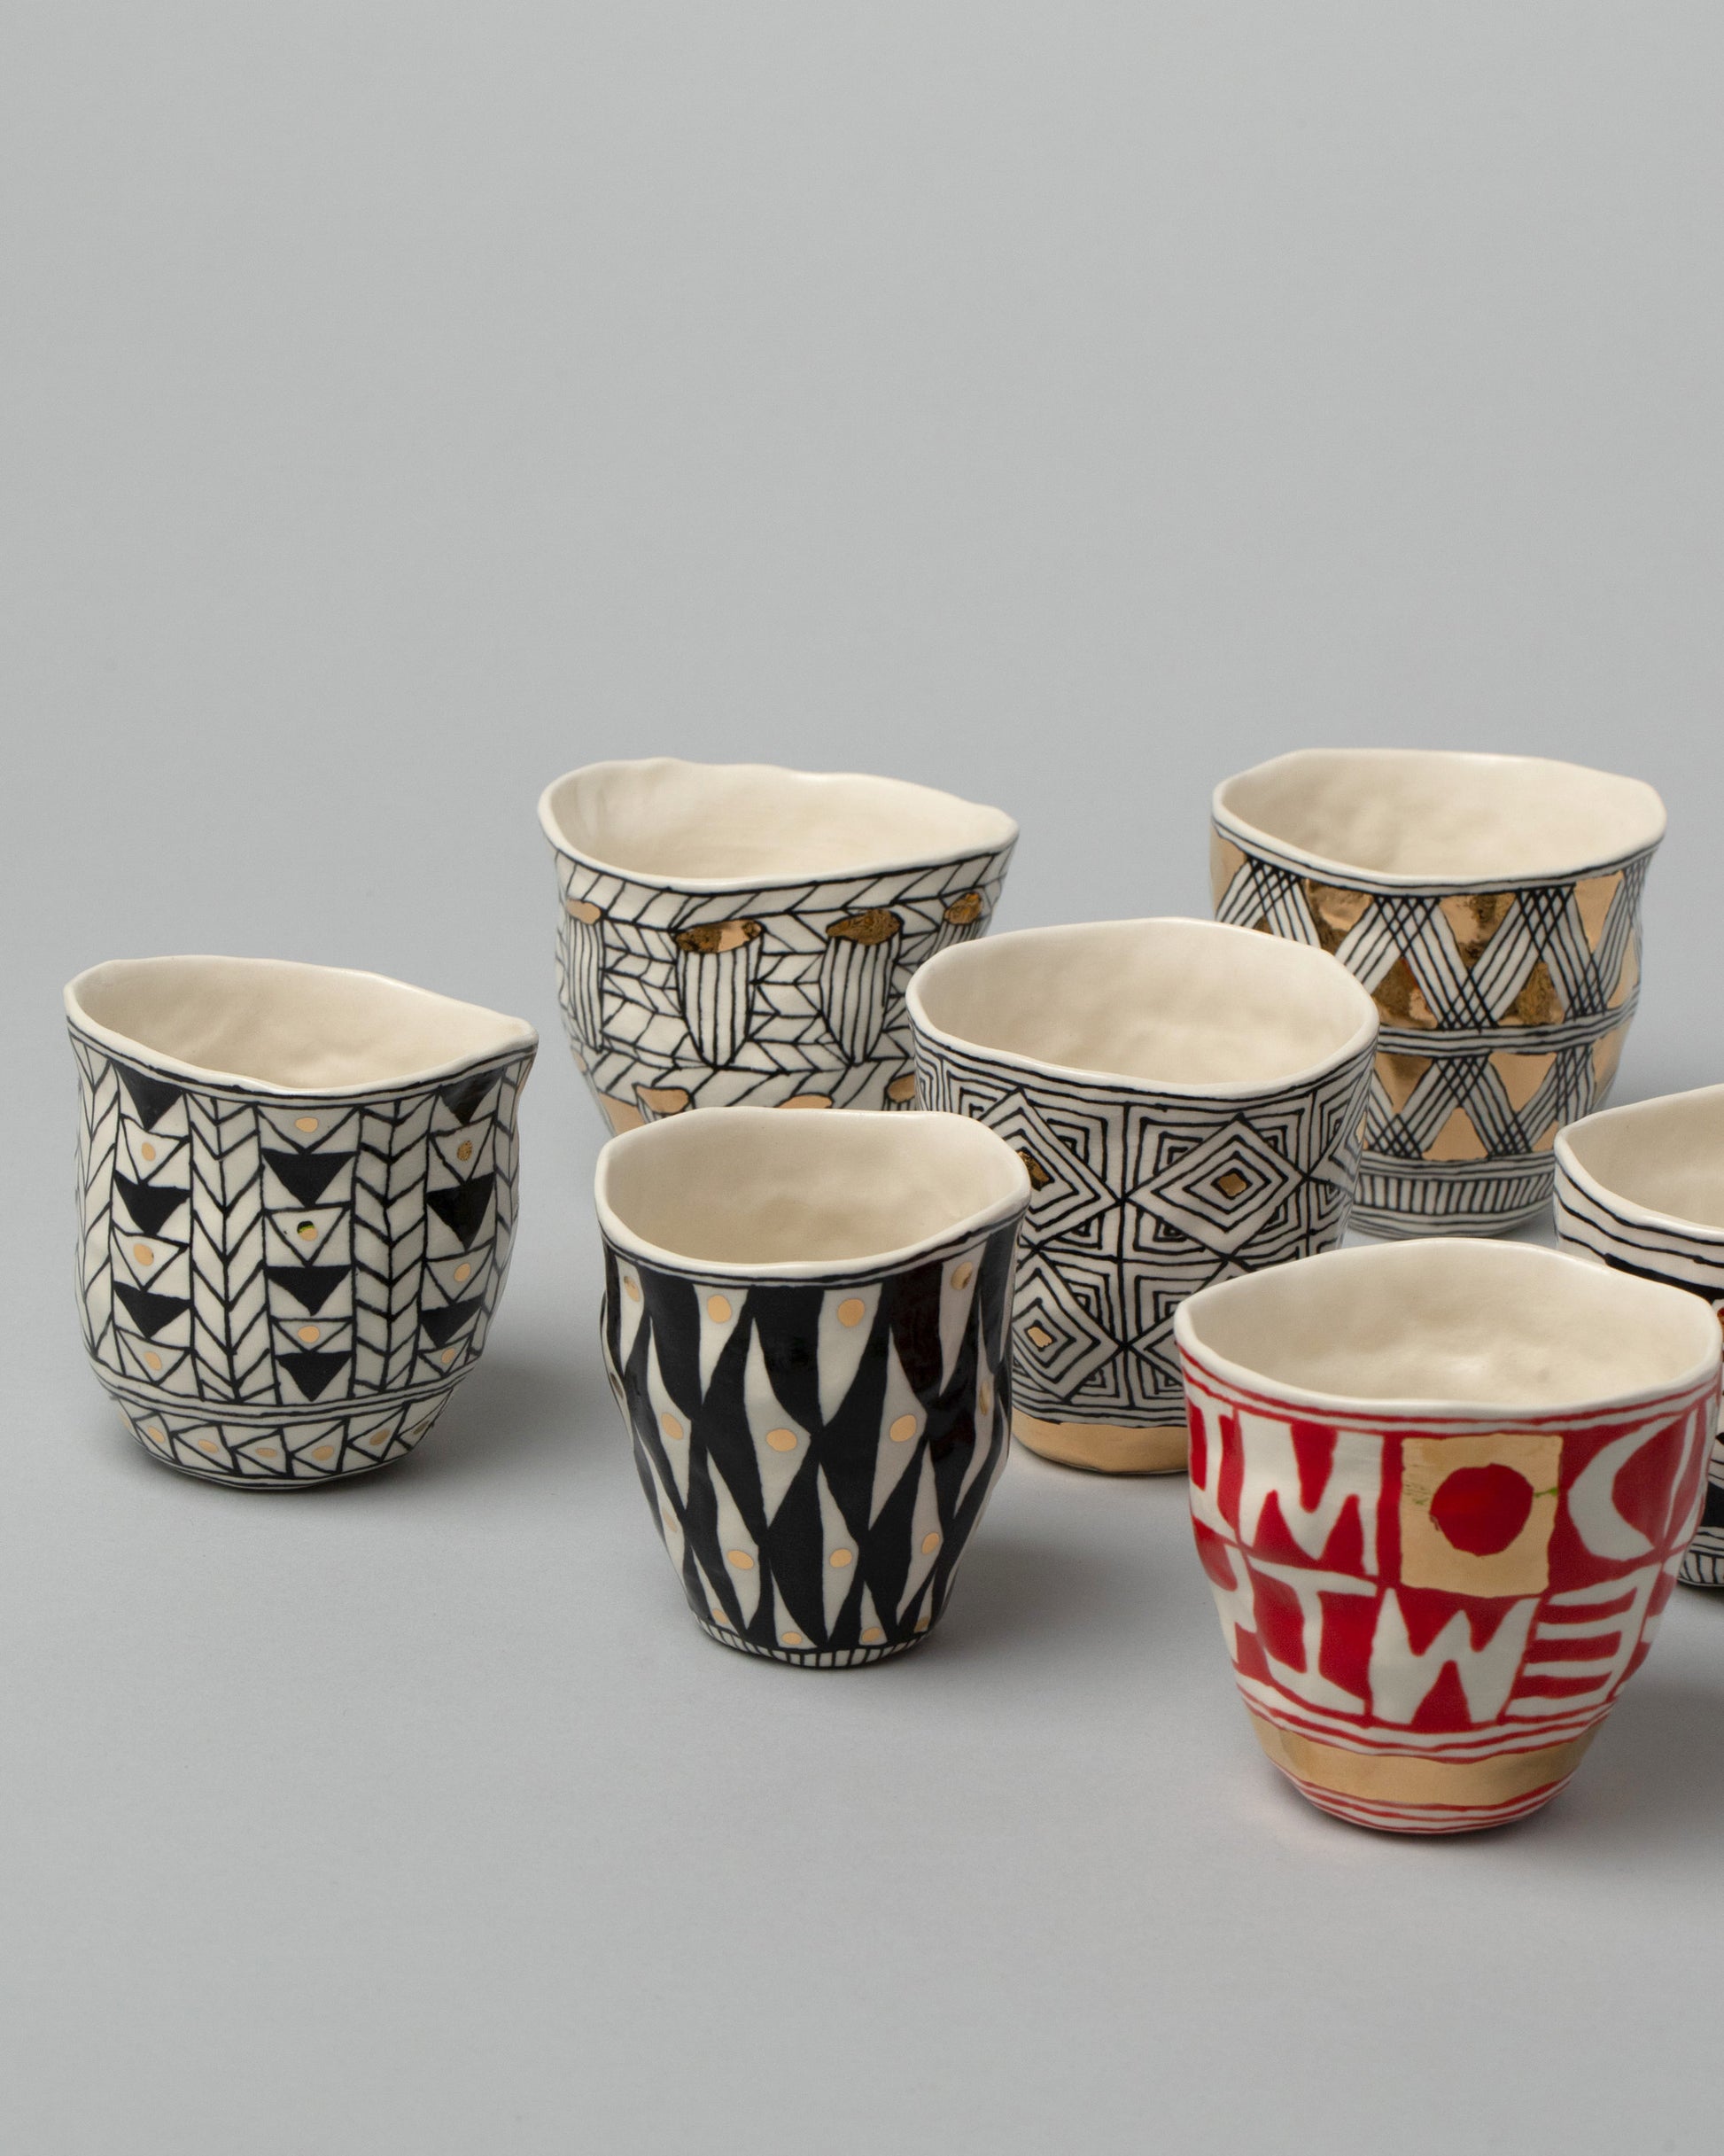 Group of Suzanne Sullivan Geometric Tumblers on light color background.